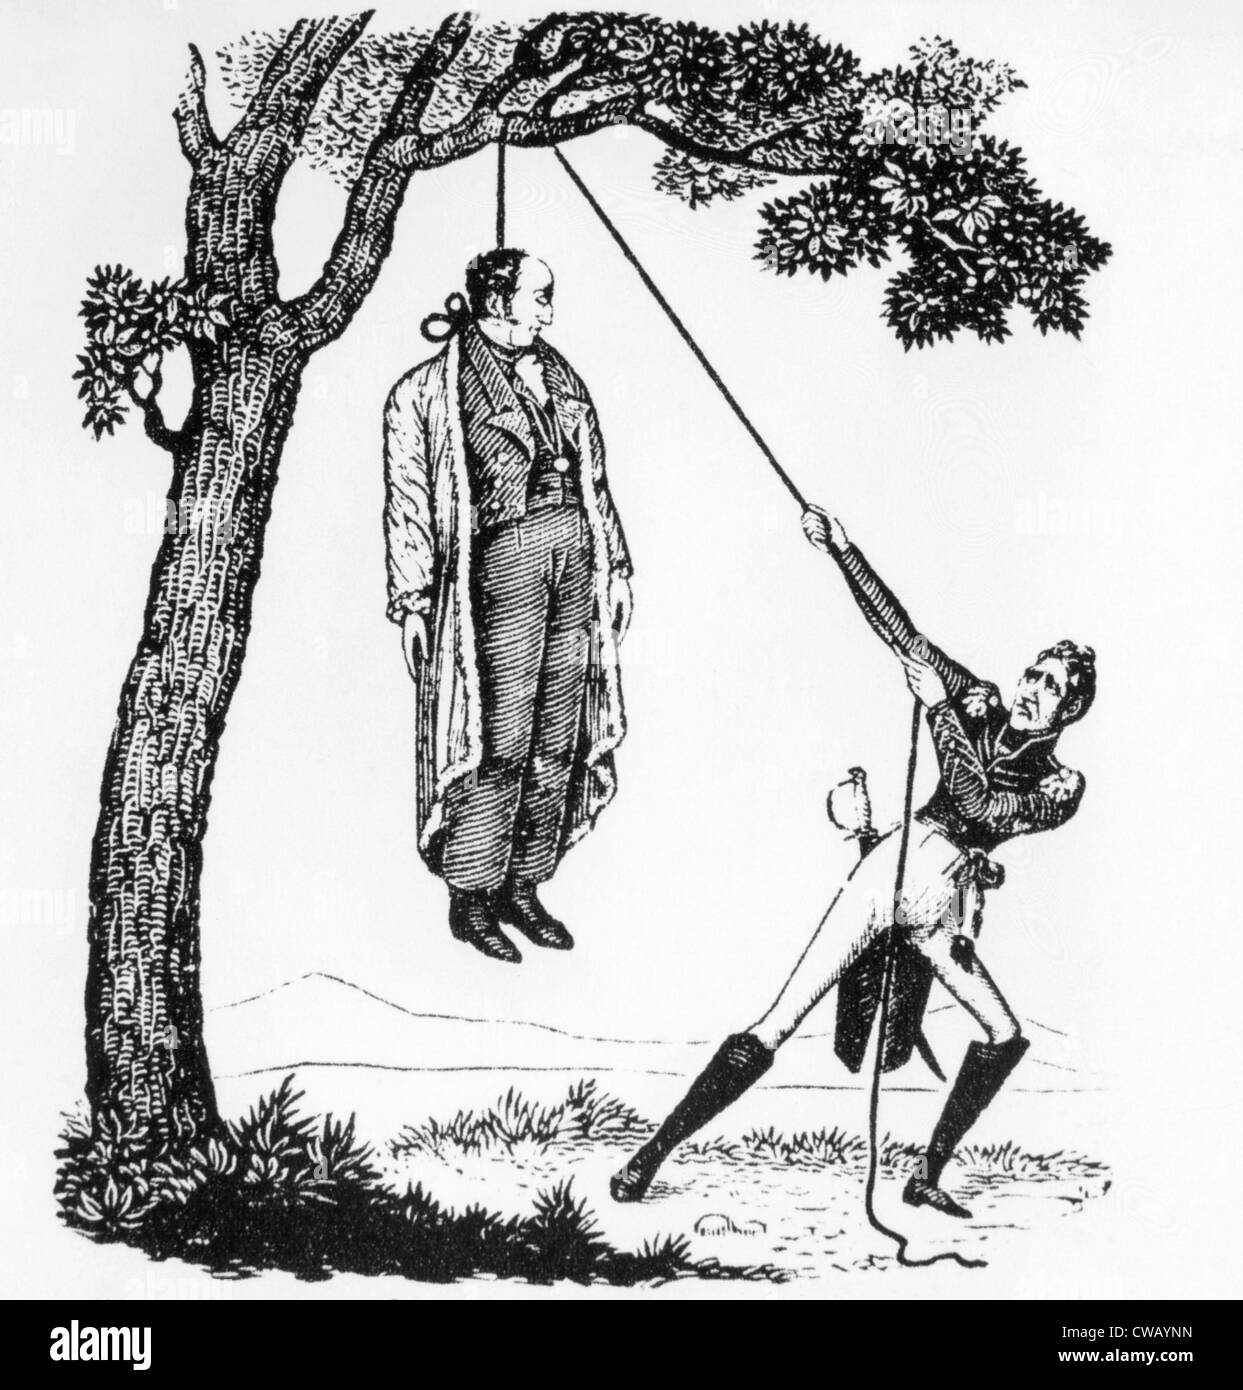 Political cartoon depicting President John Quincy Adams being hung by opposition candidate Andrew Jackson during the Stock Photo